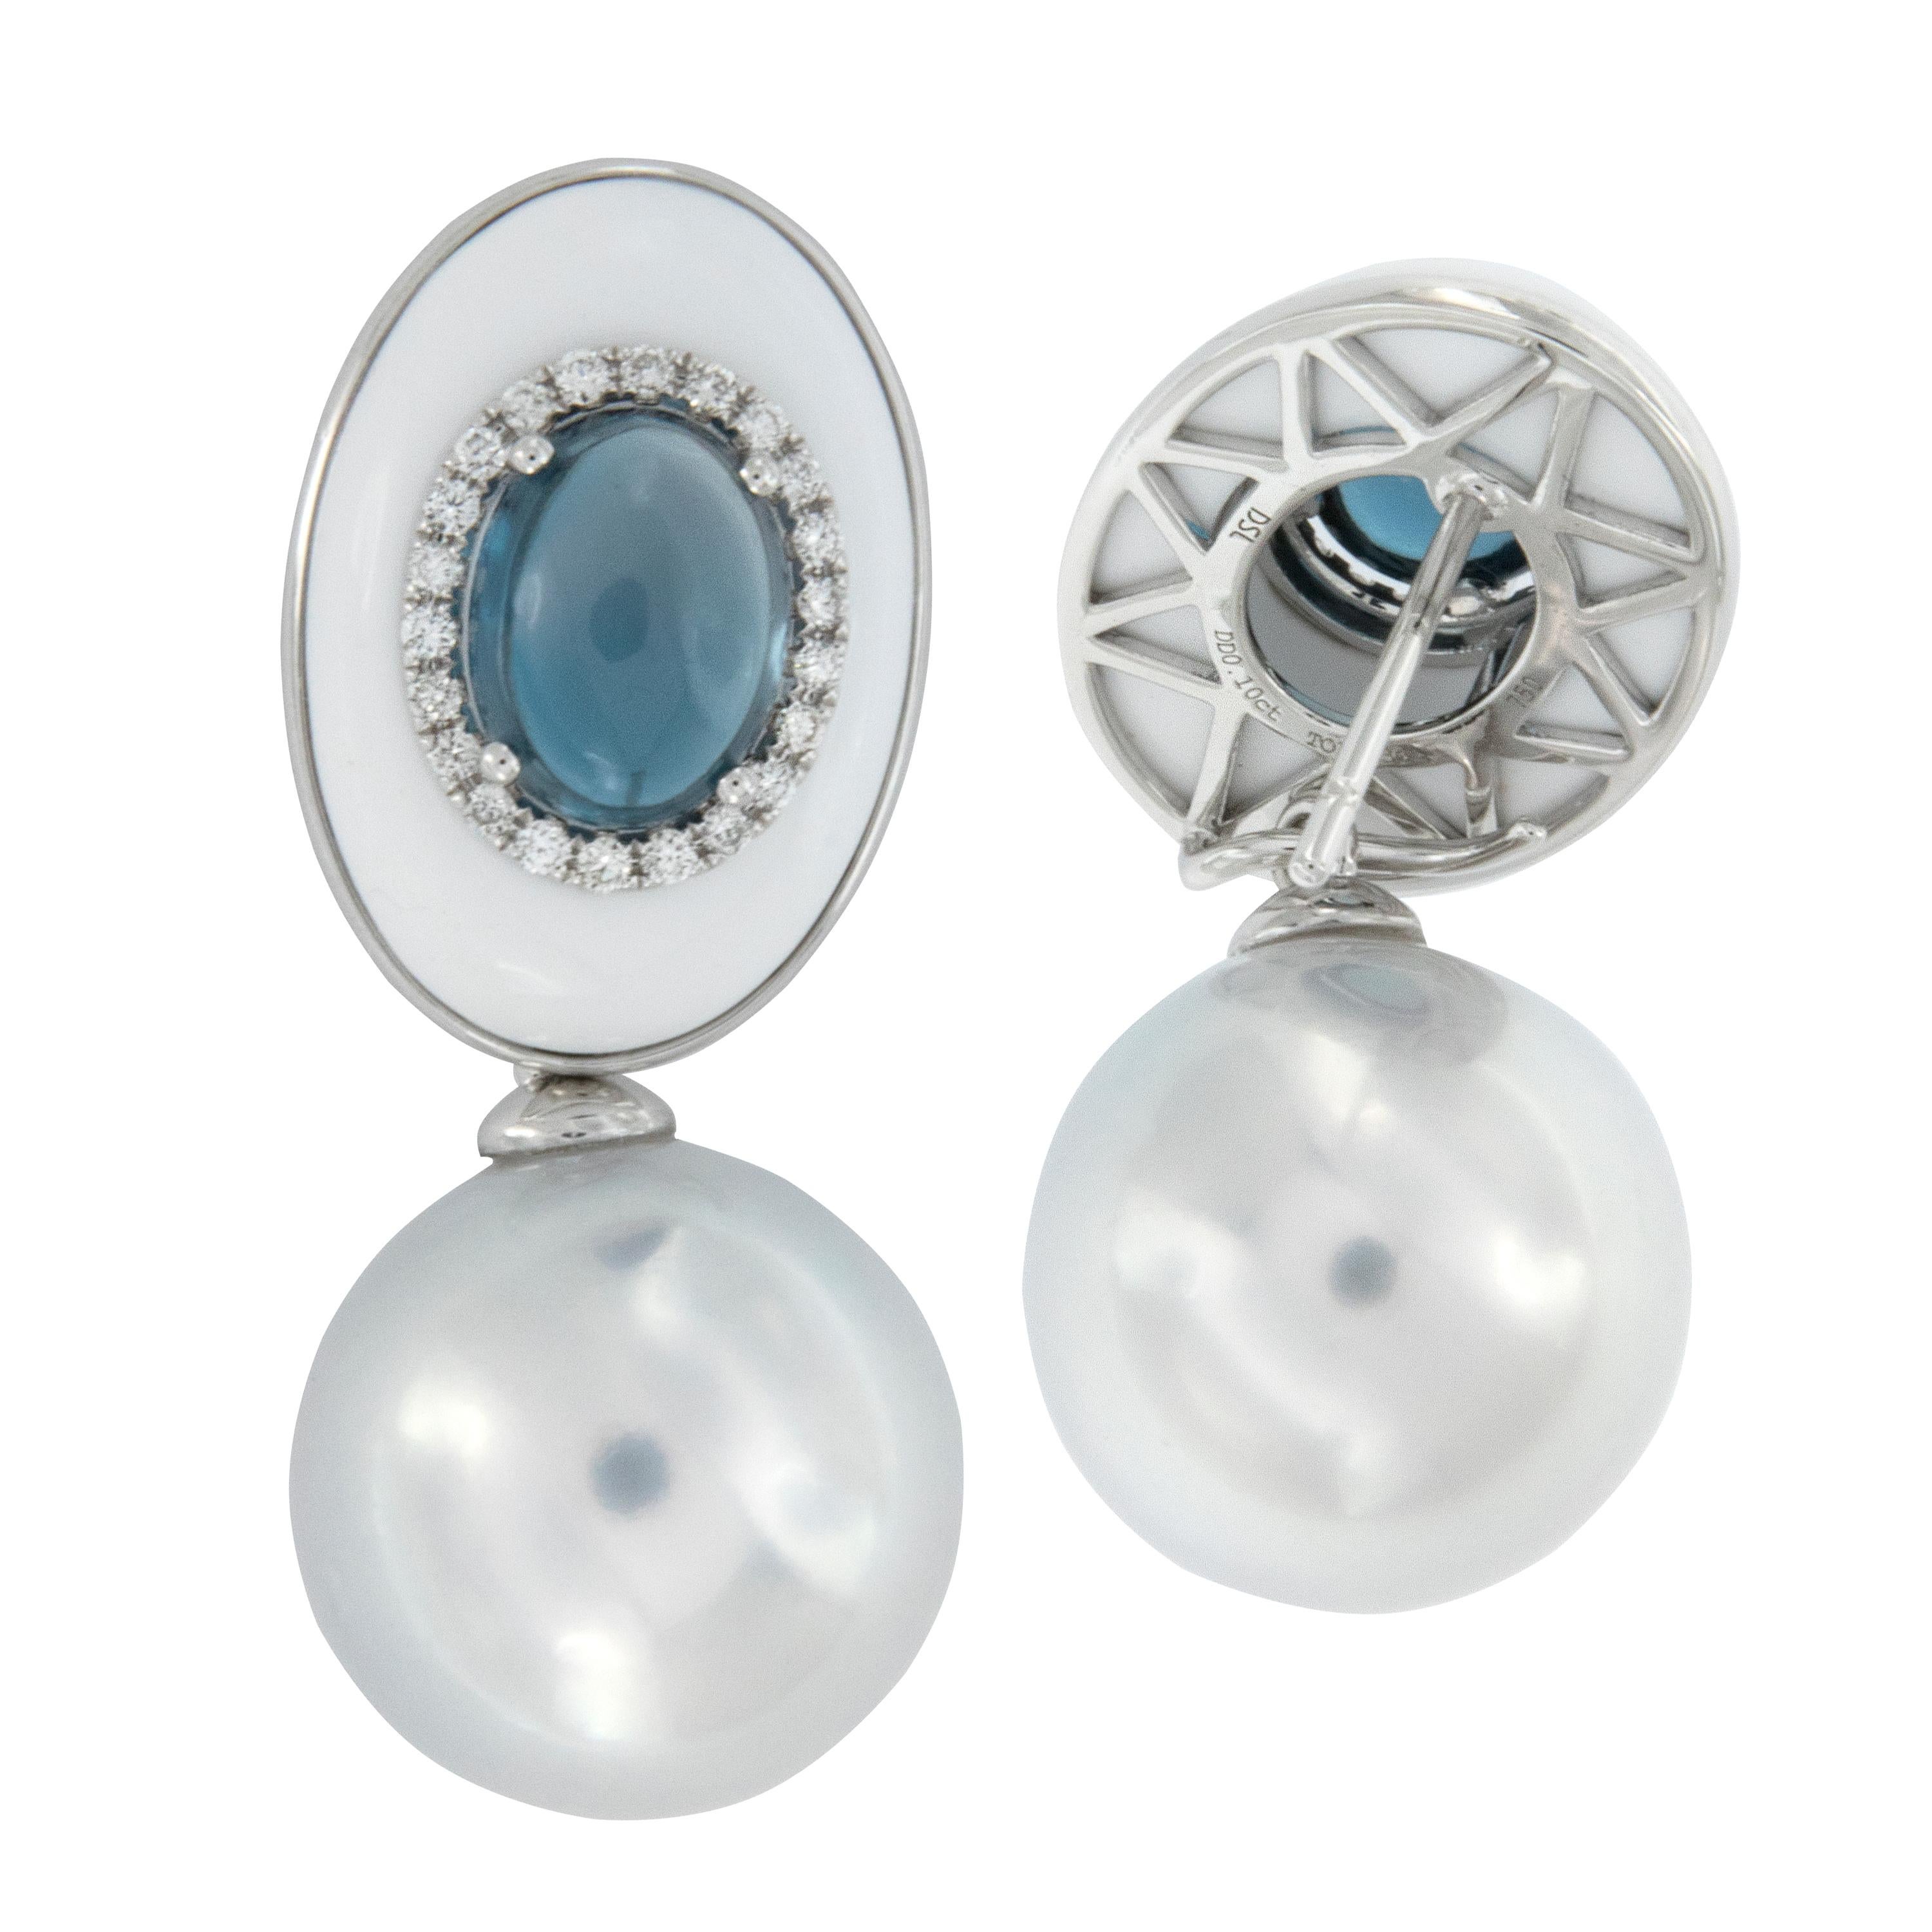 The beautifully arranged colors of white, blue & silver/white in these drop South Sea earrings are spectacular! Their large size, limited culturing area, and extended growth period all combine to make South Sea pearls the rarest of all pearl types.